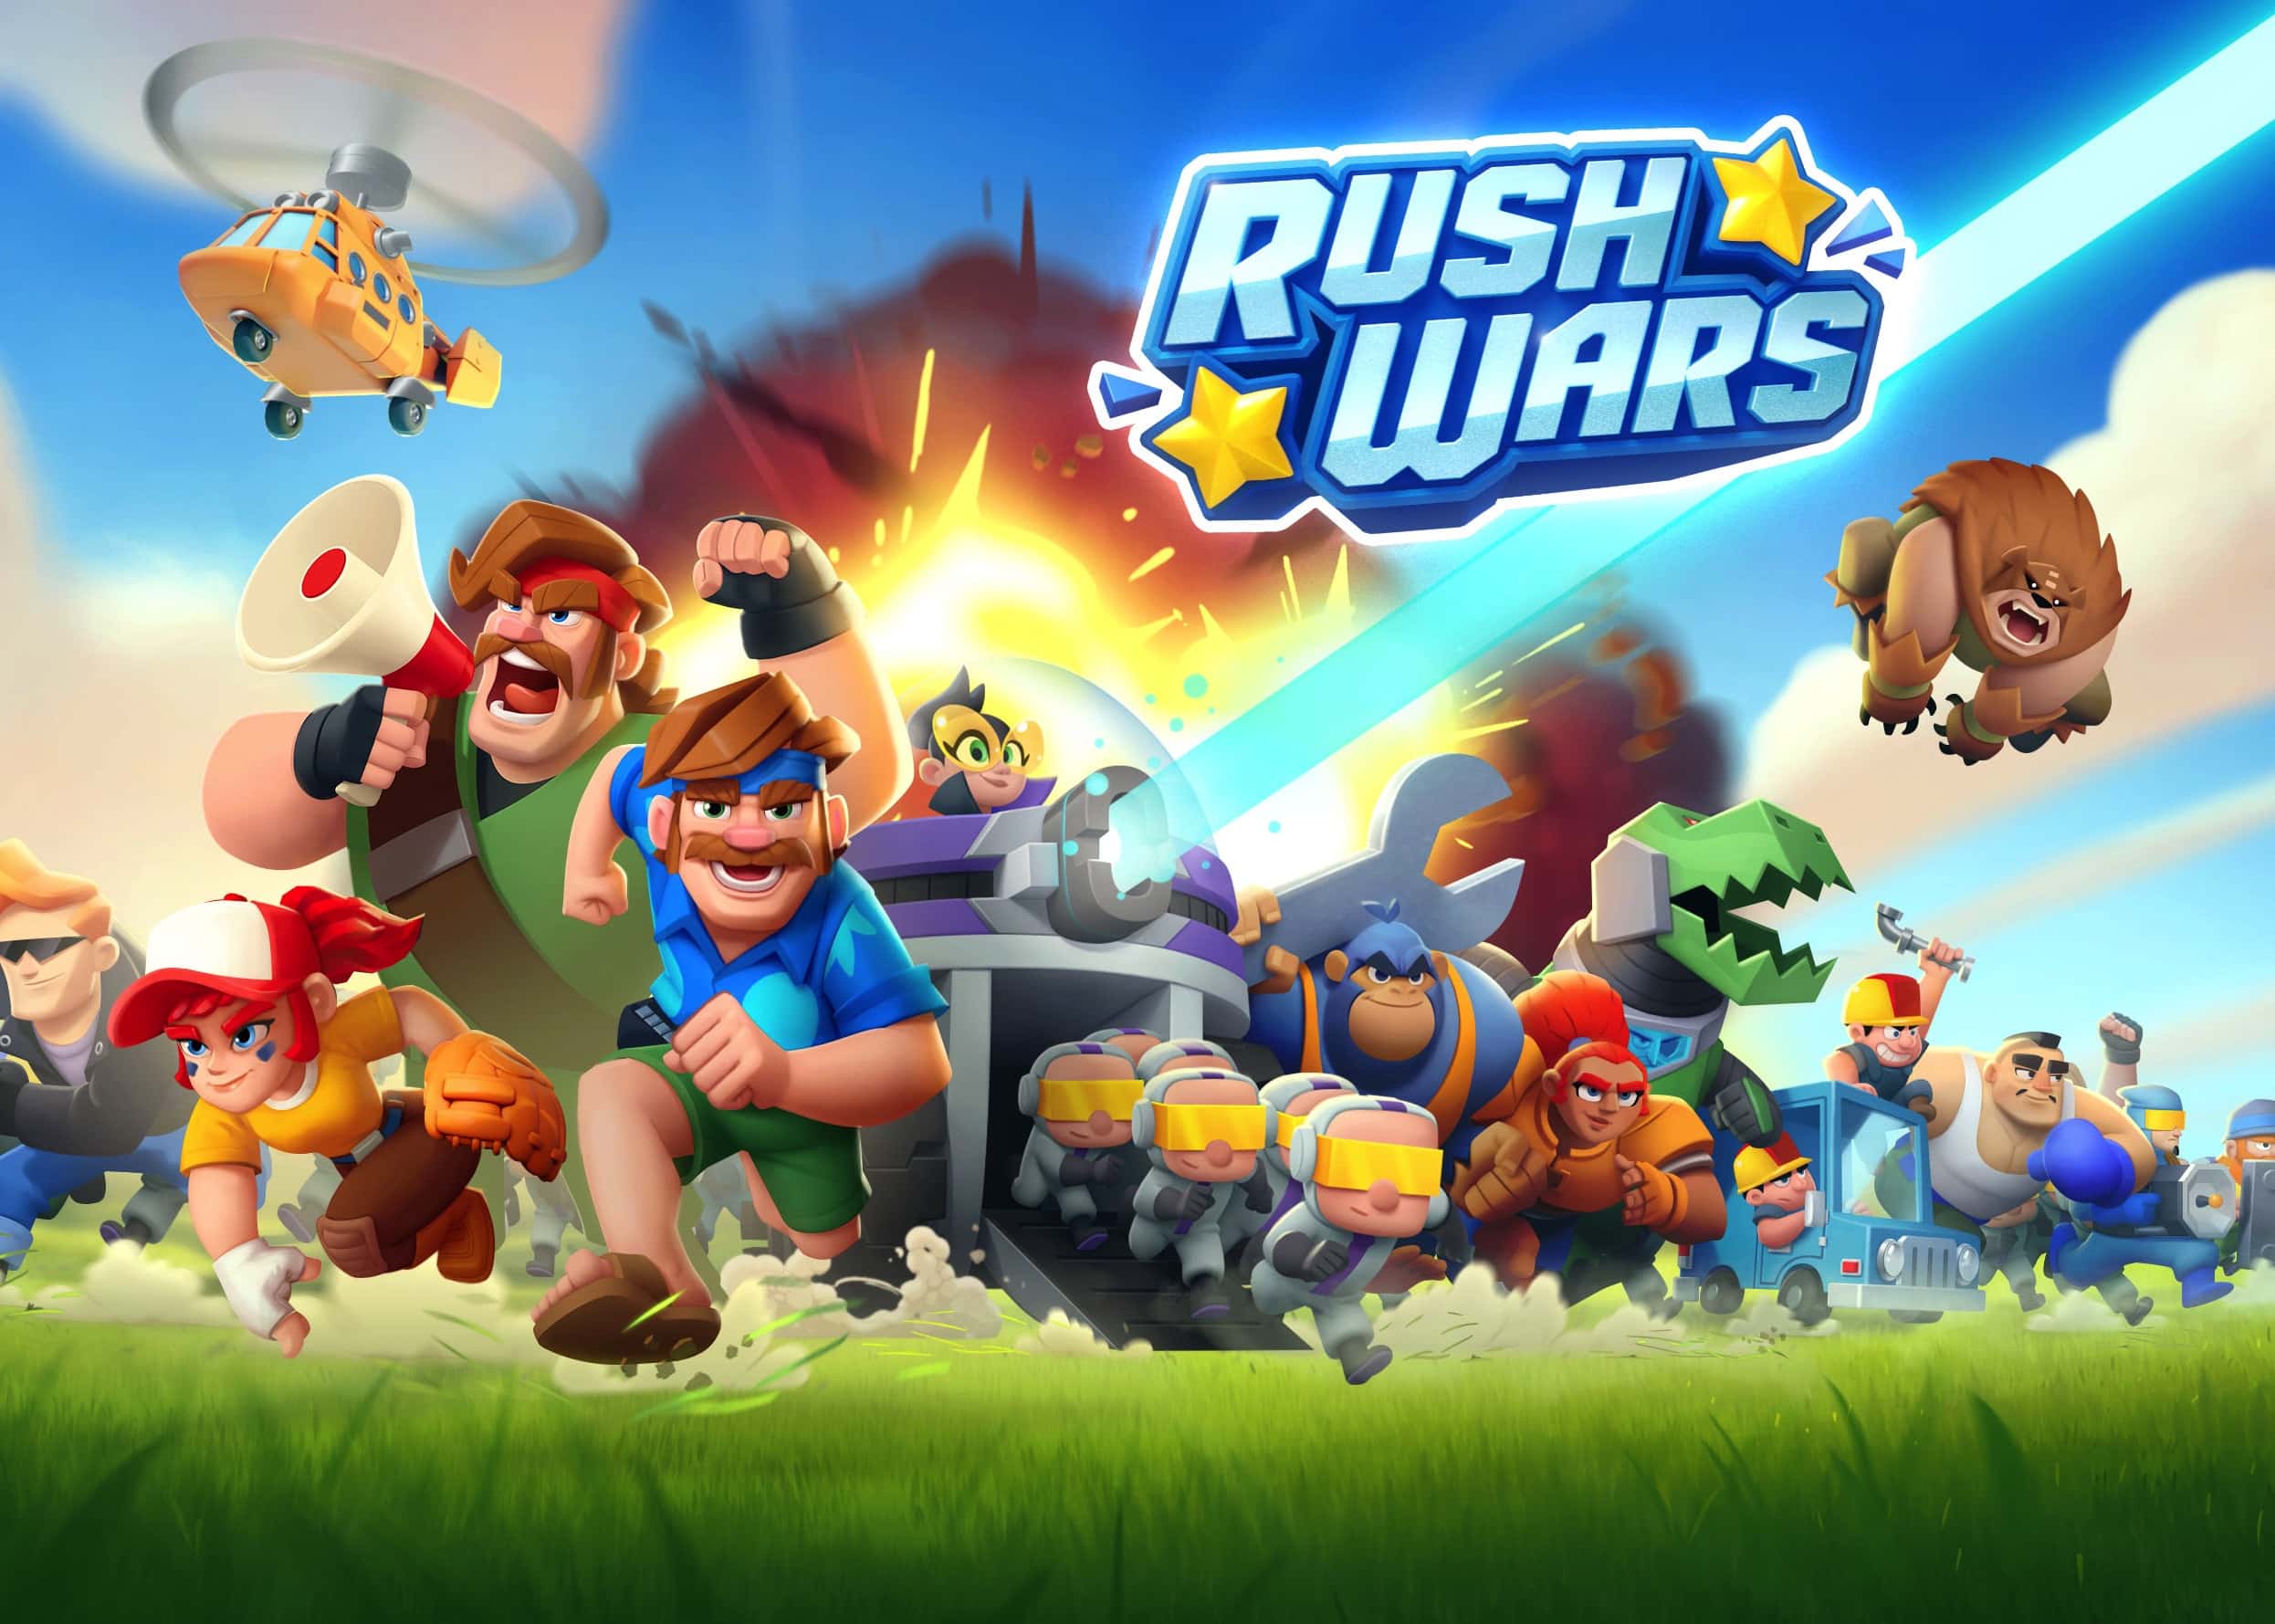 Supercell’s Rush Wars has gone to the big App Store in the sky